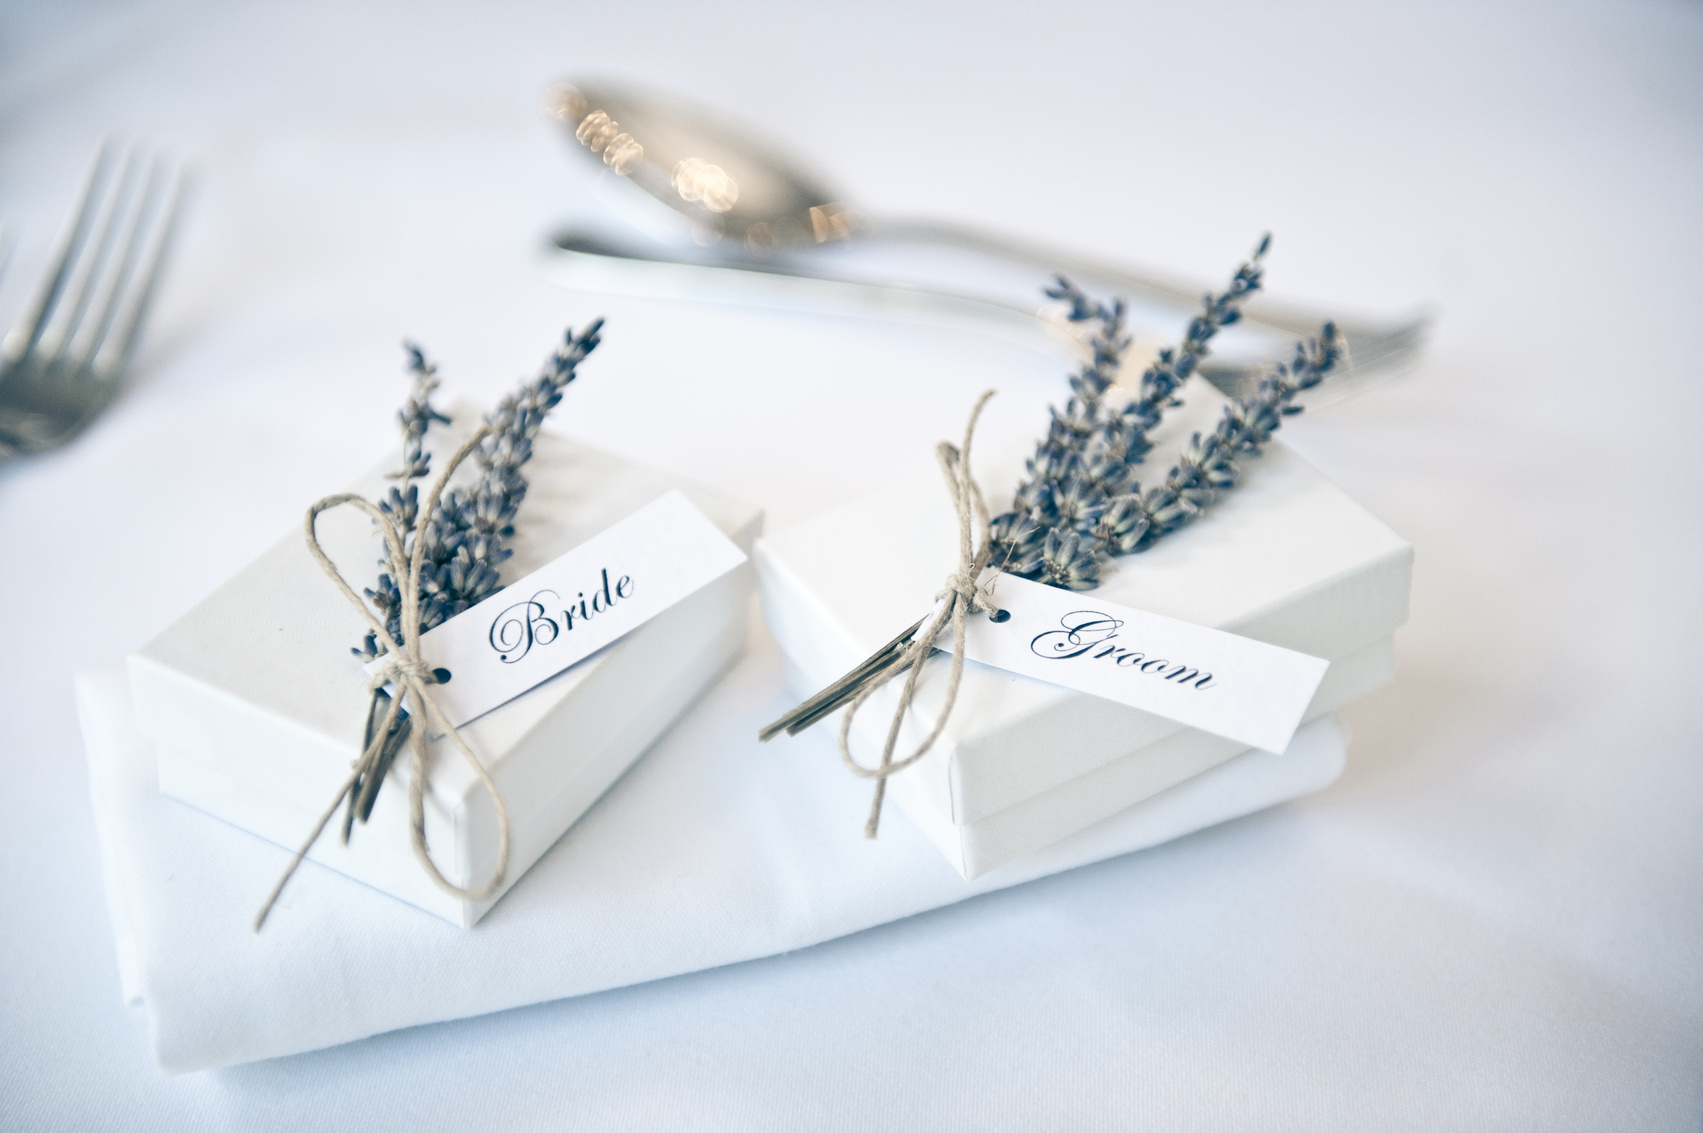 Bride and Groom Wedding Favours